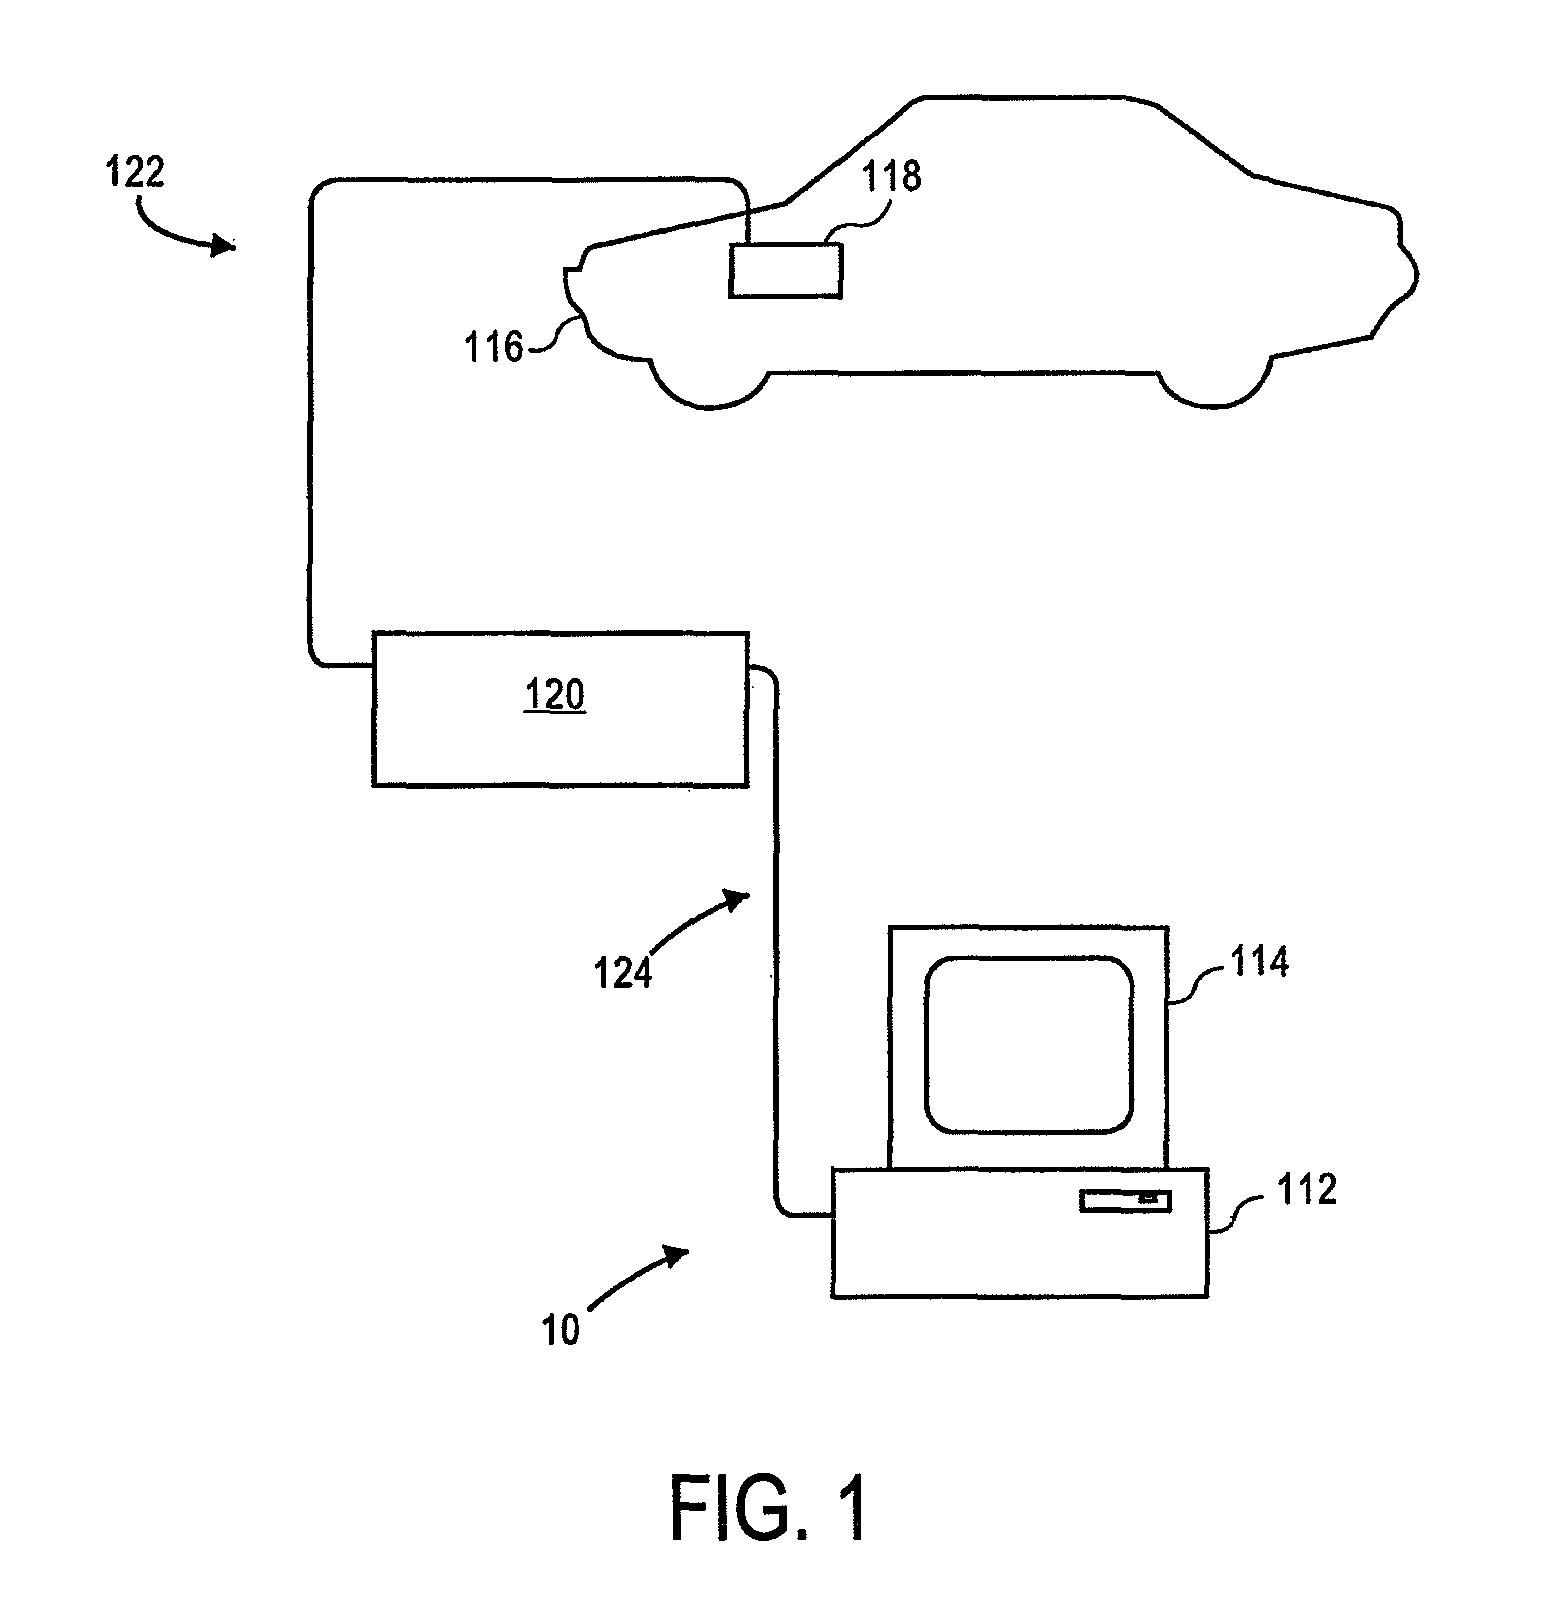 Dynamic decision sequencing method and apparatus for optimizing a diagnostic test plan